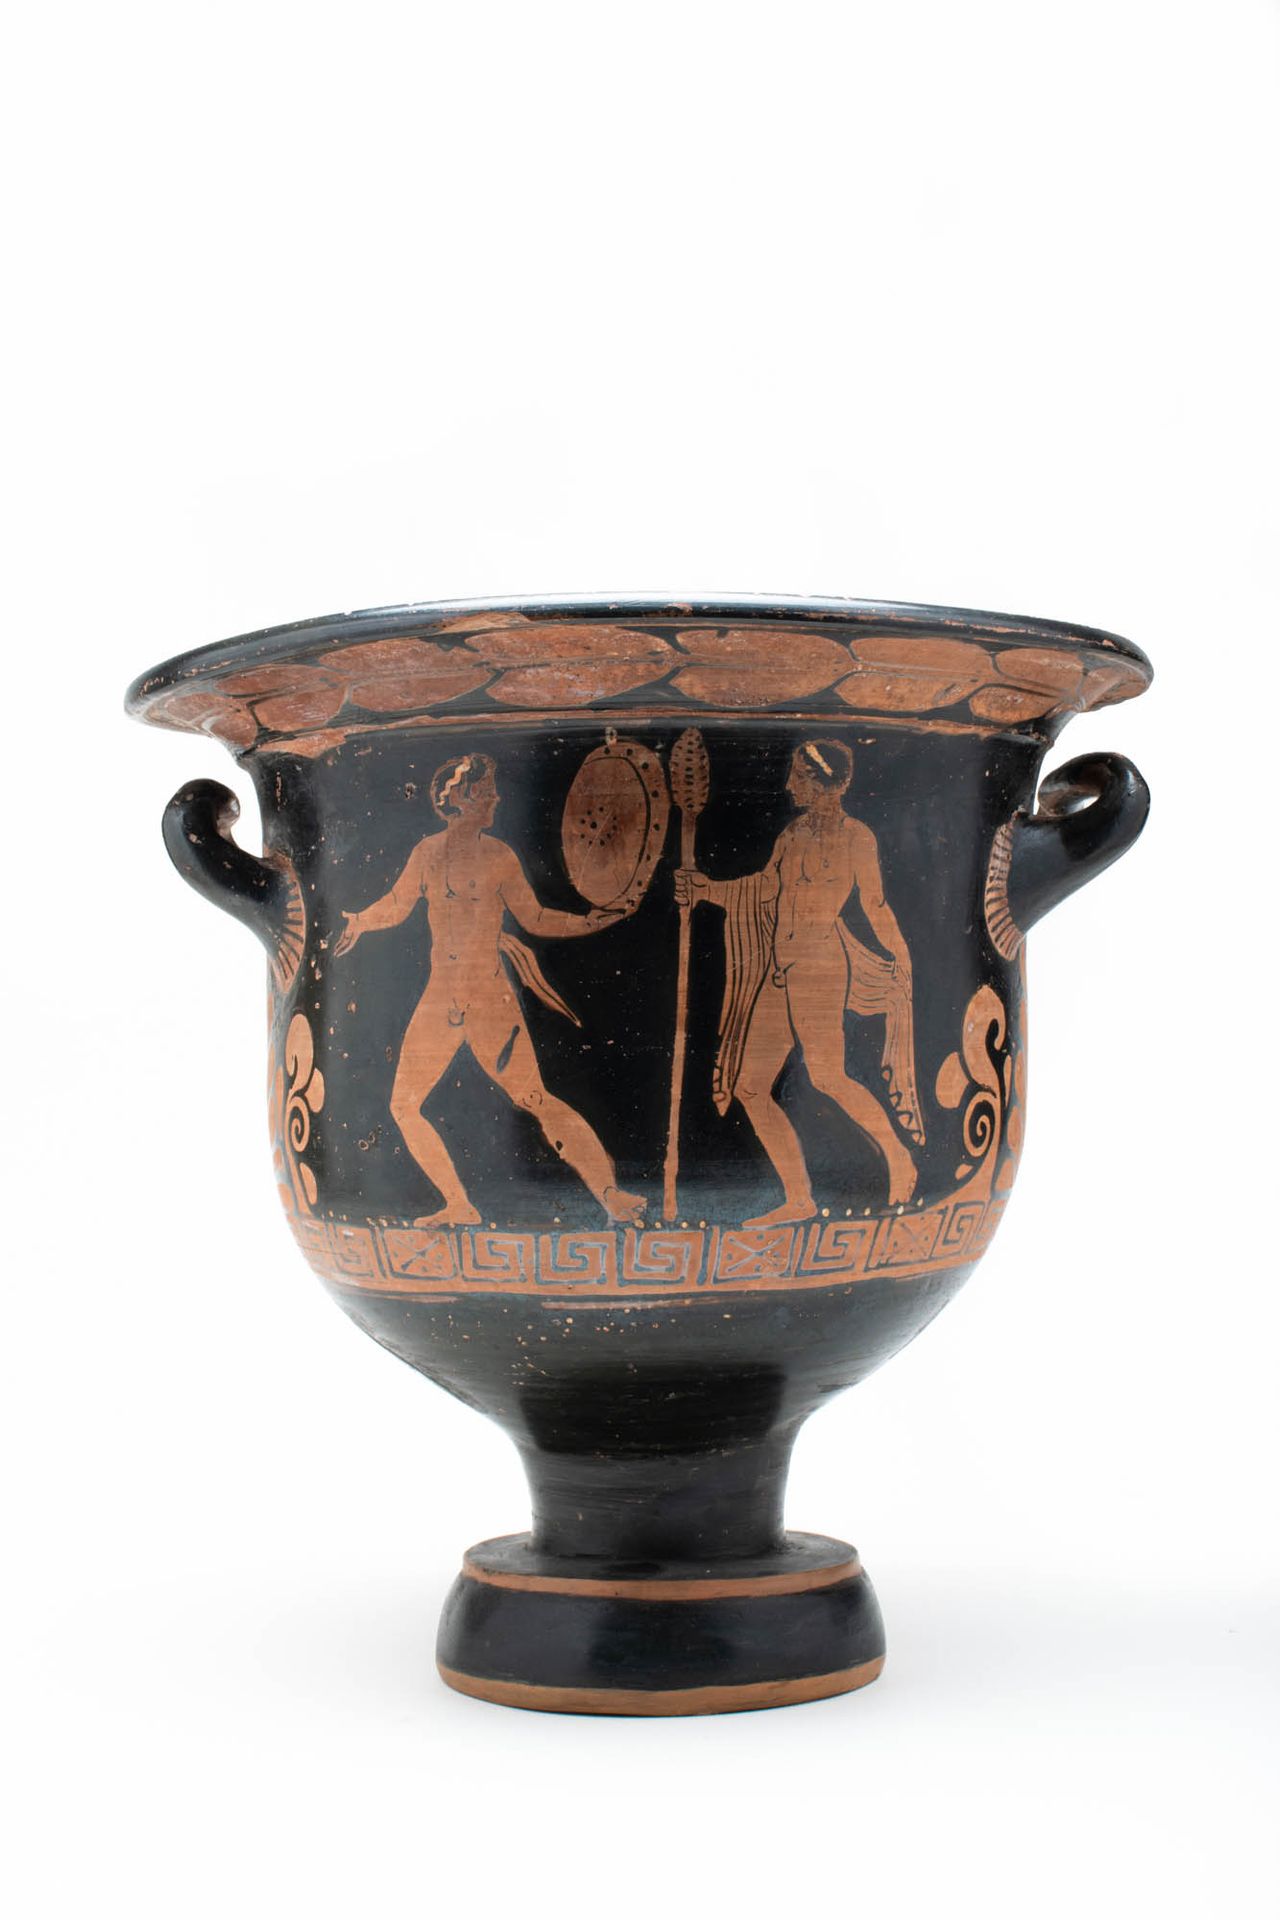 APULIAN RED-FIGURE BELL KRATER WITH SATYR AND DIONYSUS Ca. 390 BC.
A pottery bel&hellip;